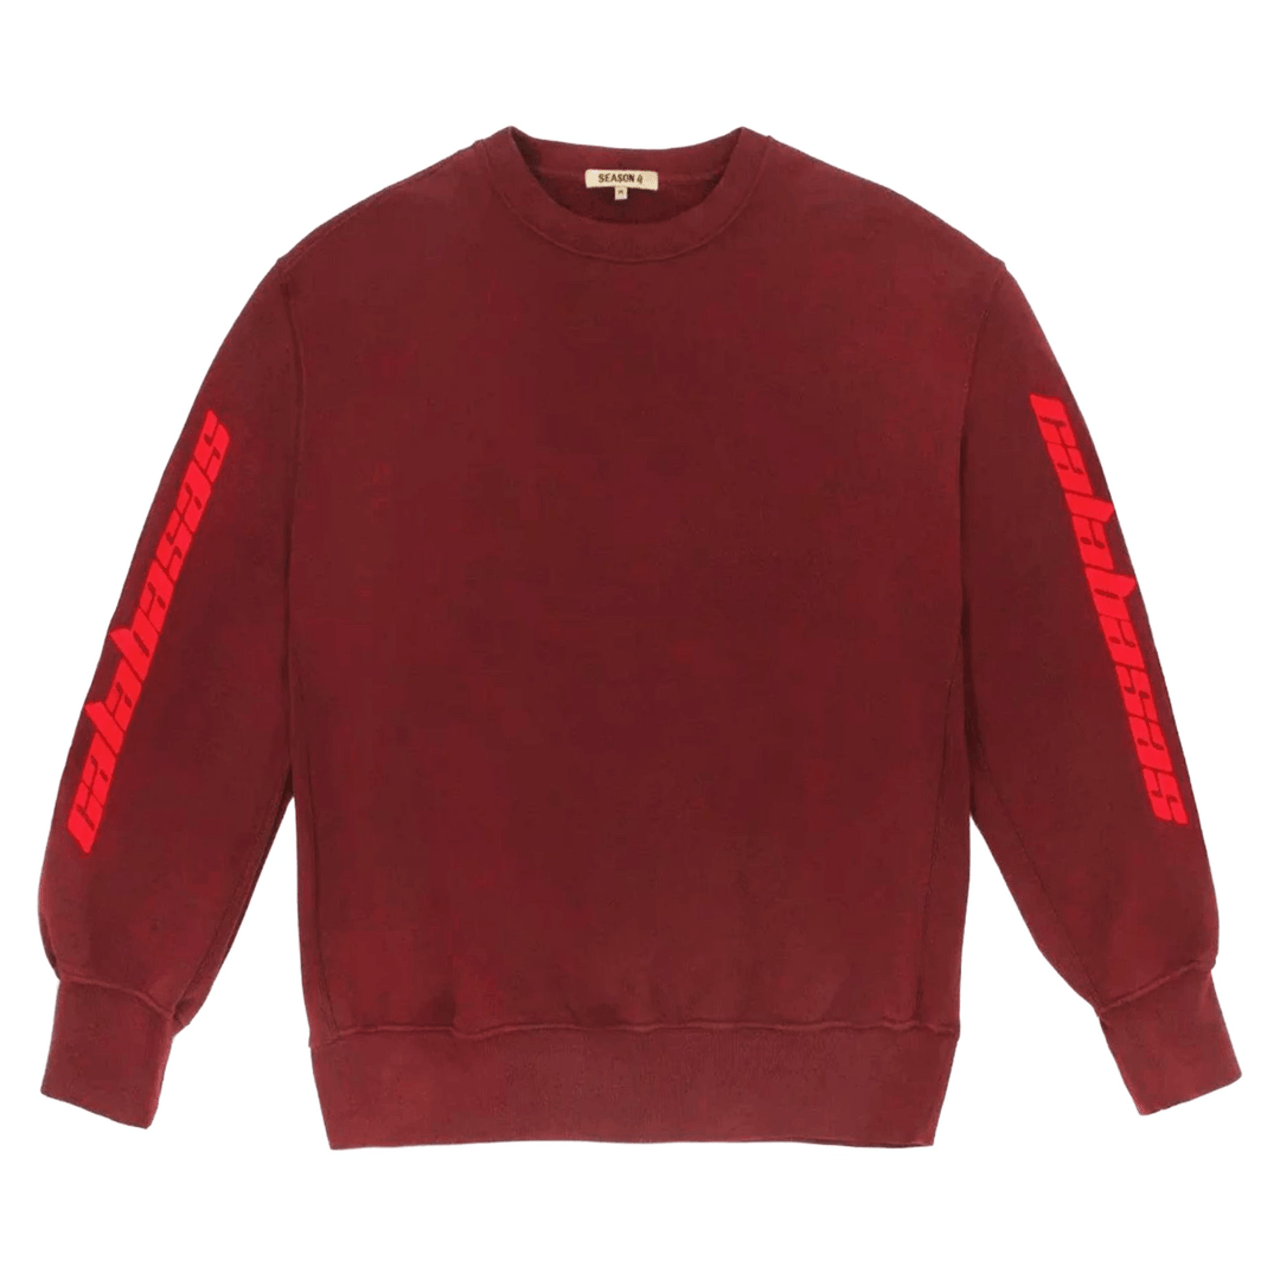 Yeezy Red Sweater